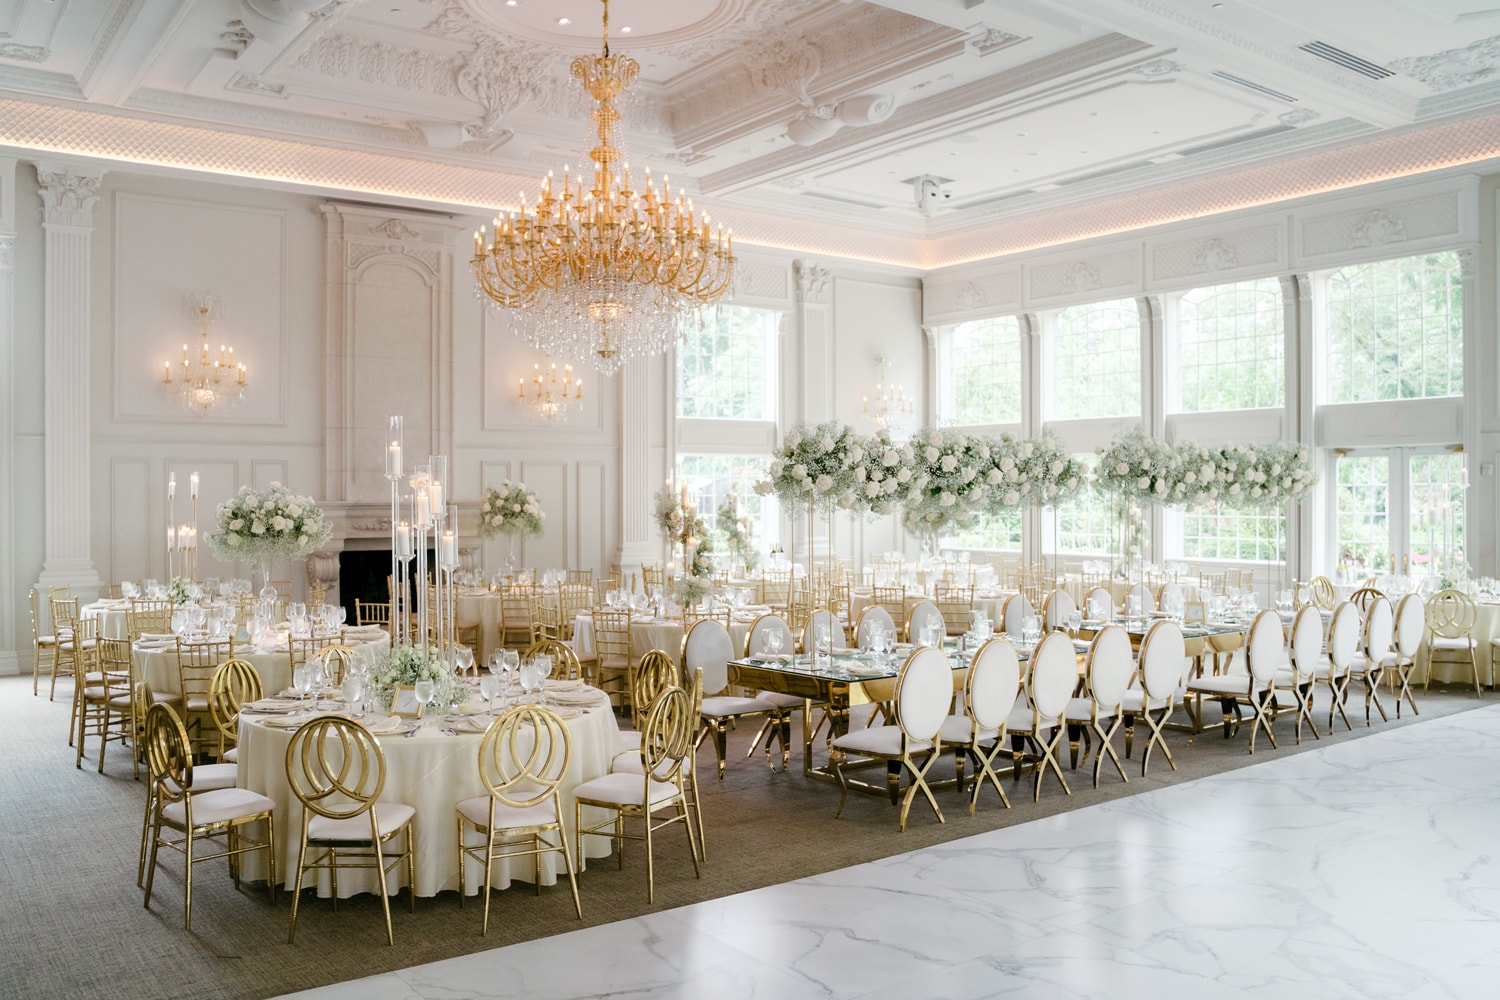 An elegant wedding reception setup at the estate of Florentine Gardens in New Jersey, featuring a beautifully decorated indoor space with floral arrangements.